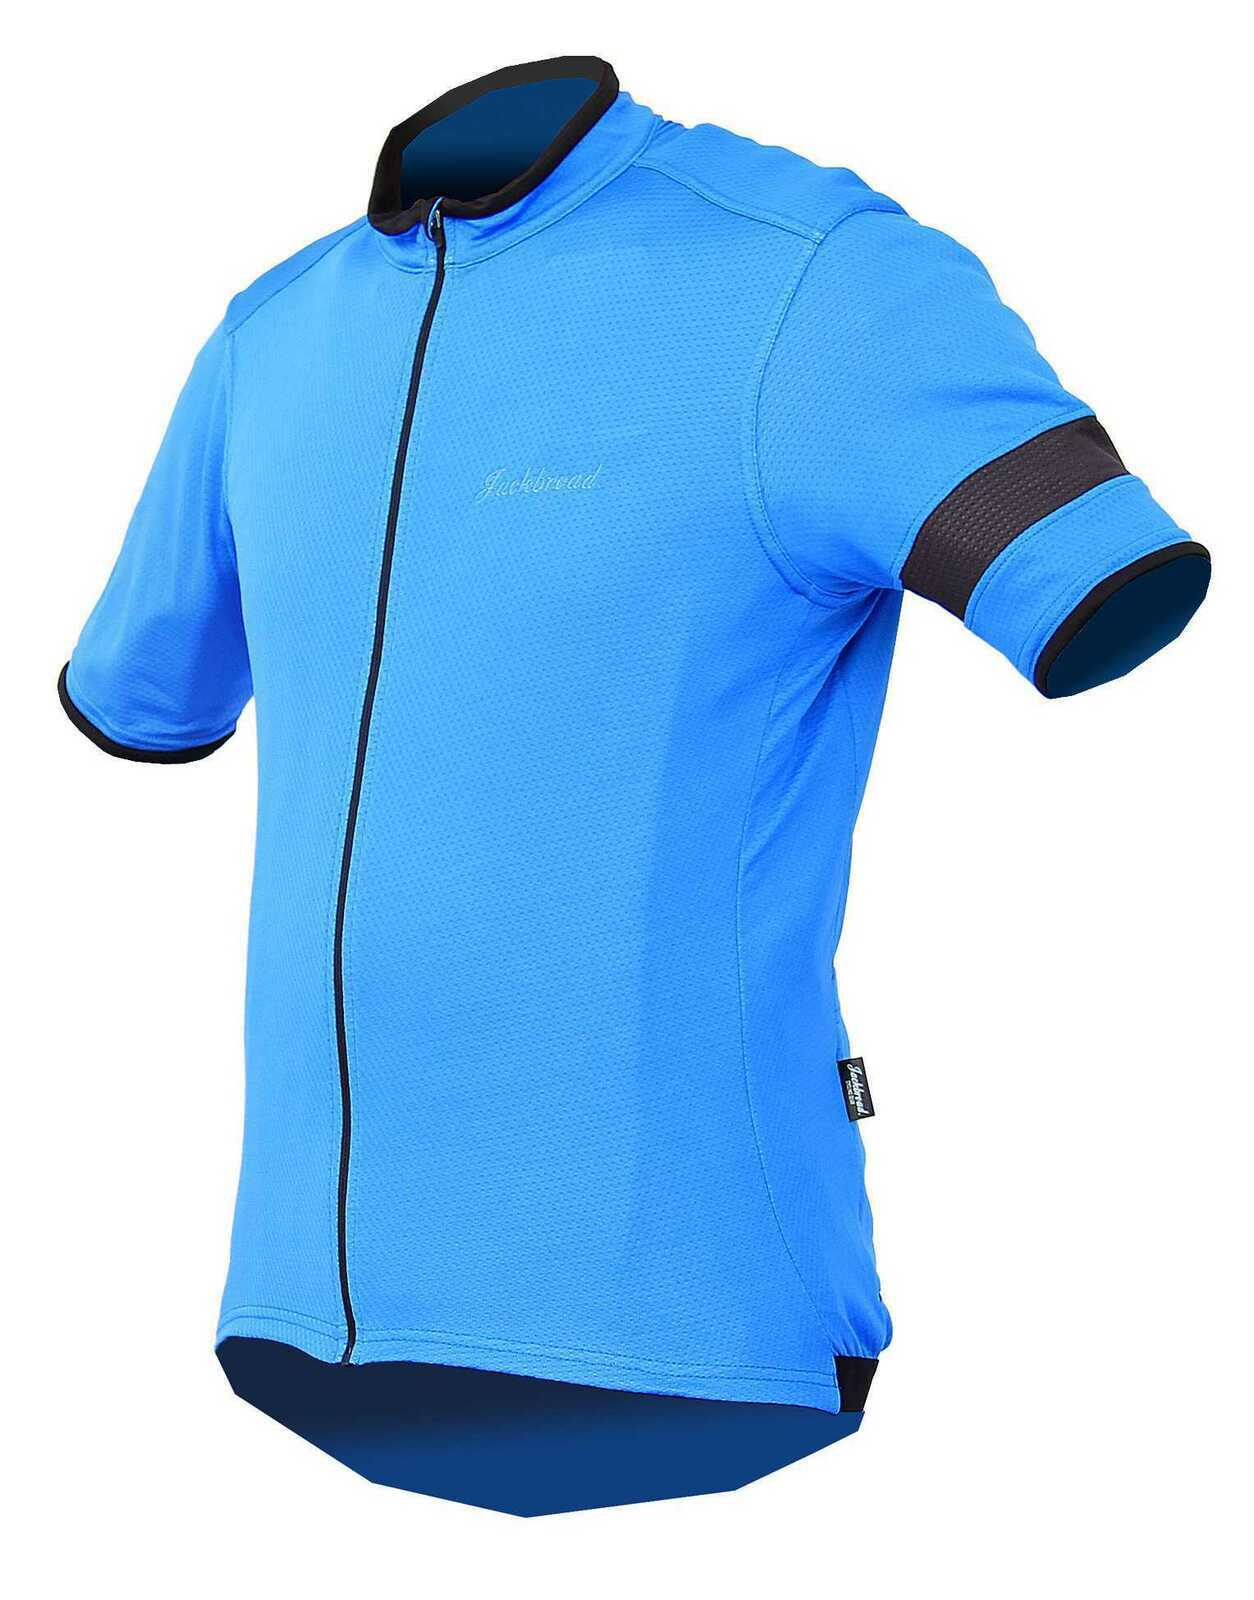 JACKBROAD lnner Ever Dry jersey Single guide wet fabric rapha